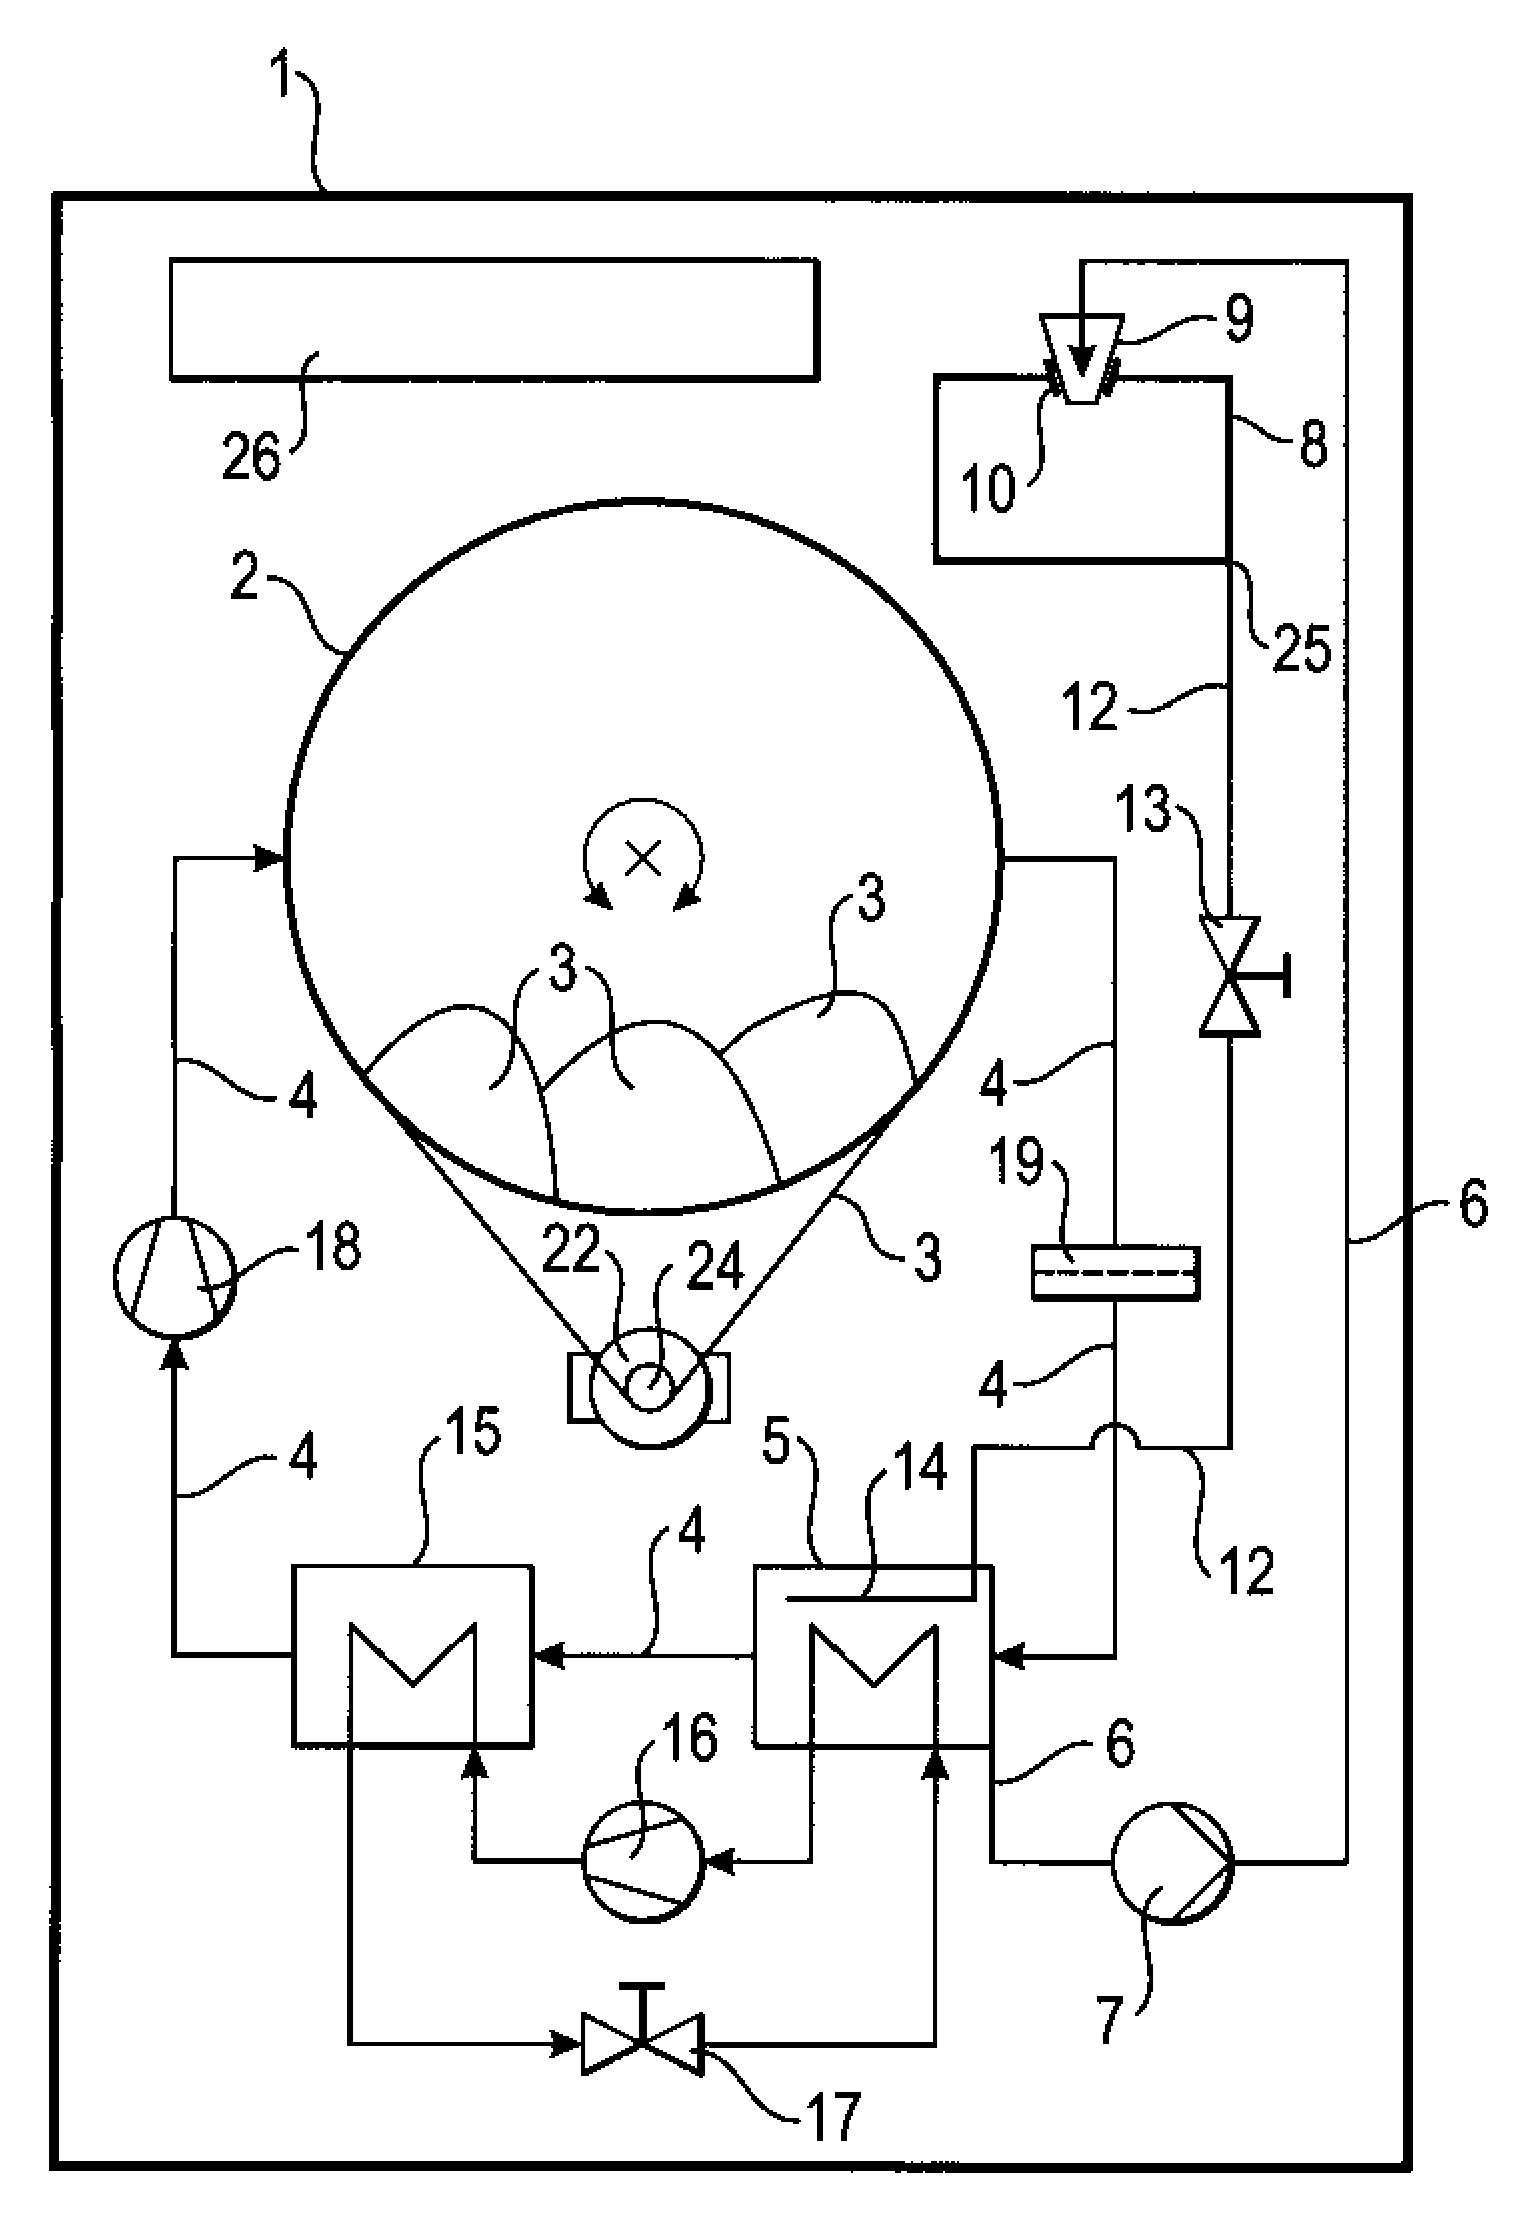 Dryer comprising a heat sink and a condensate container